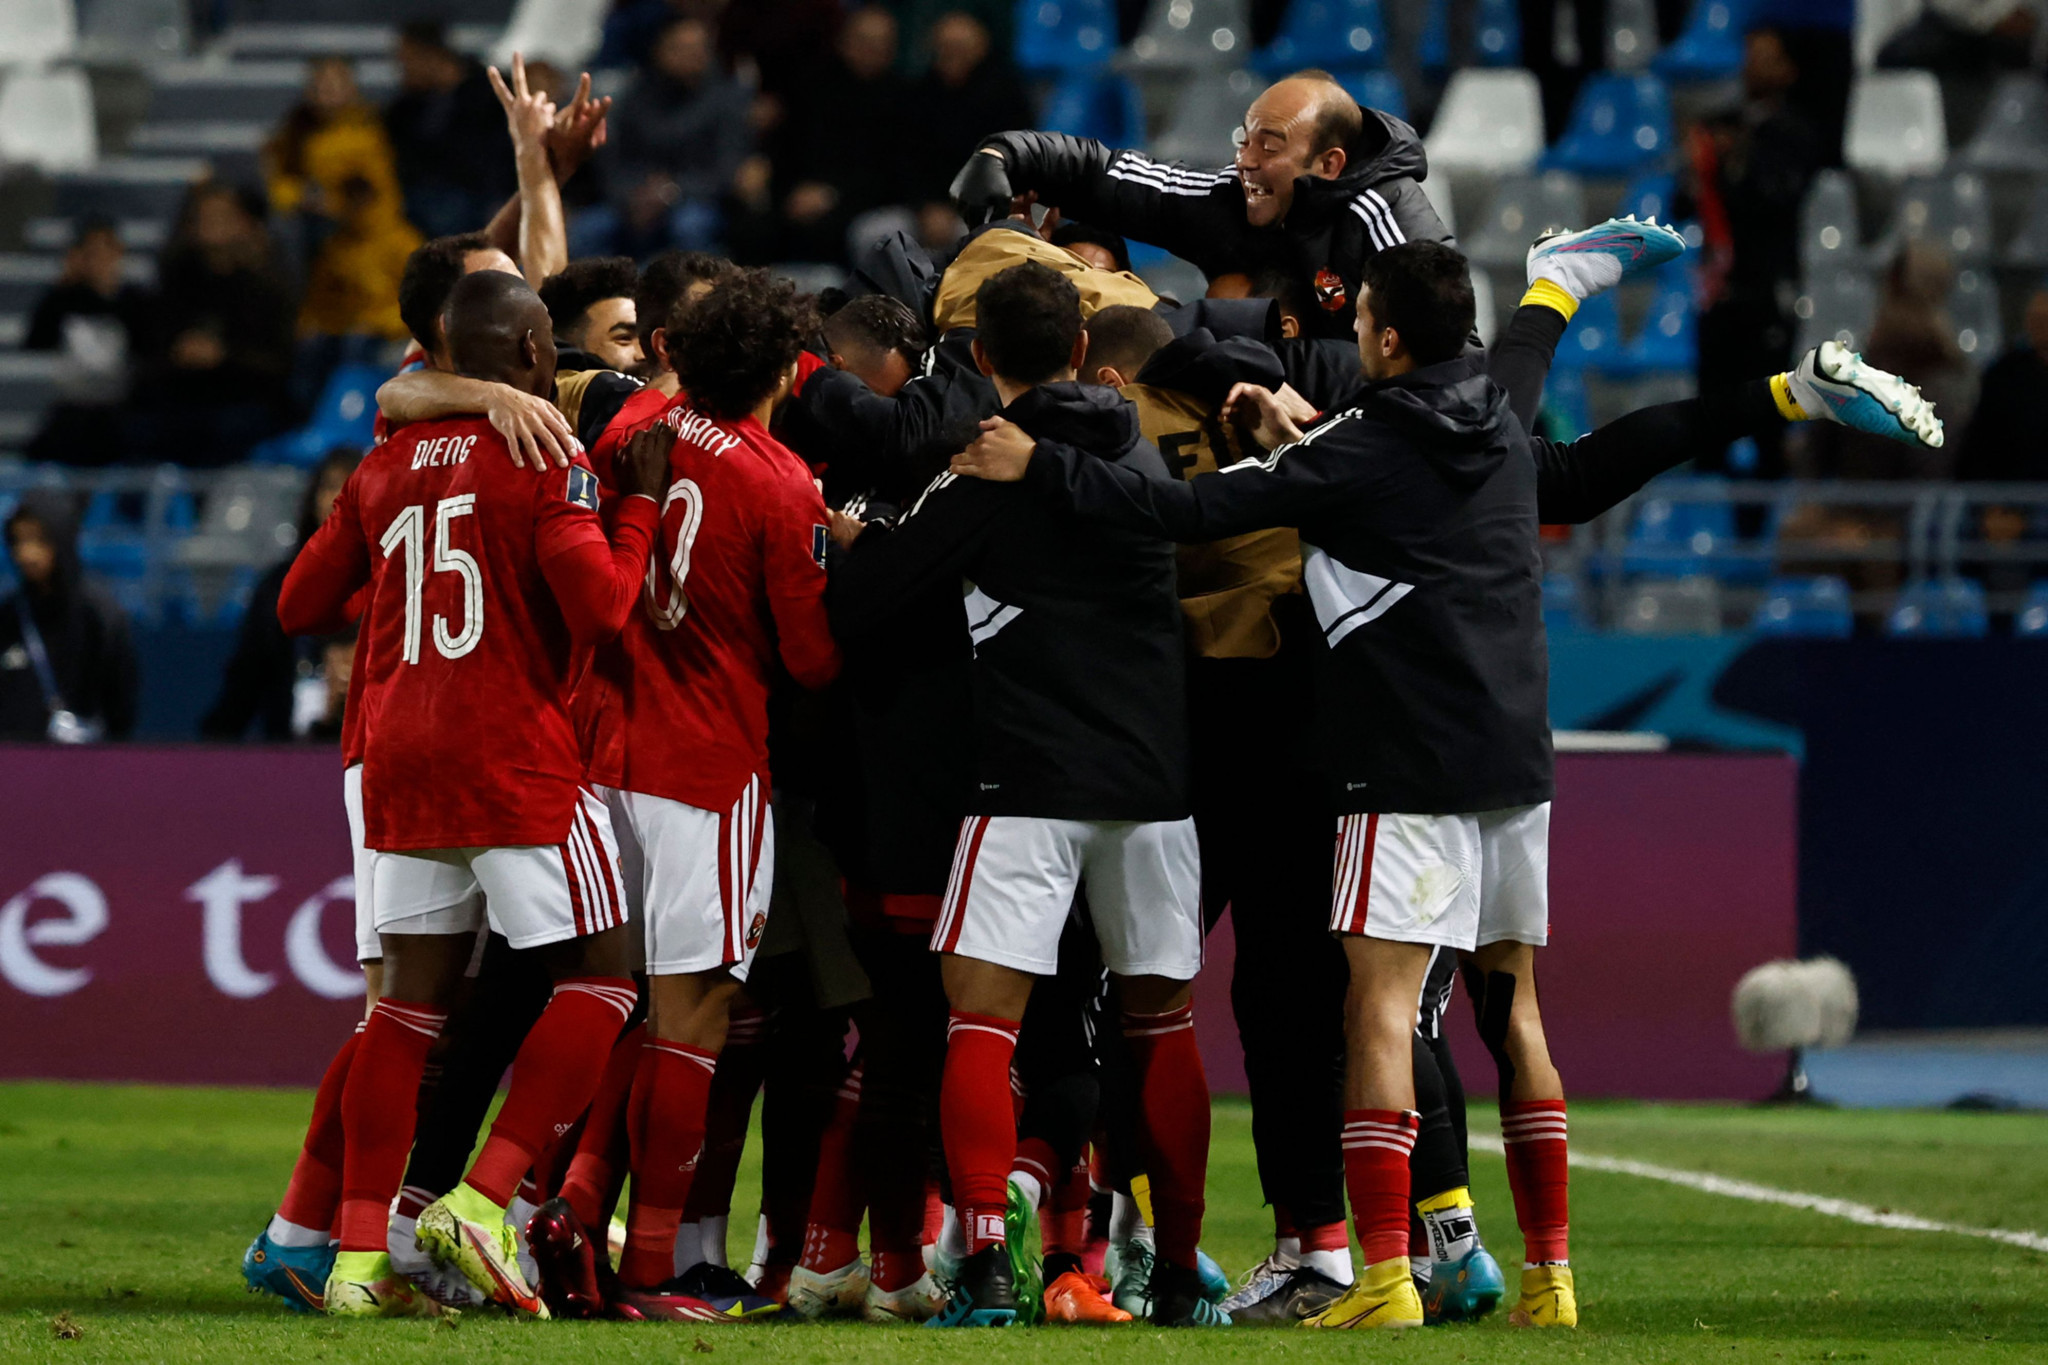 Egyptian Mohamed Afsha struck with two minutes remaining to help Al Ahly reach their third consecutive FIFA Club World Cup semi-final ©Getty Images